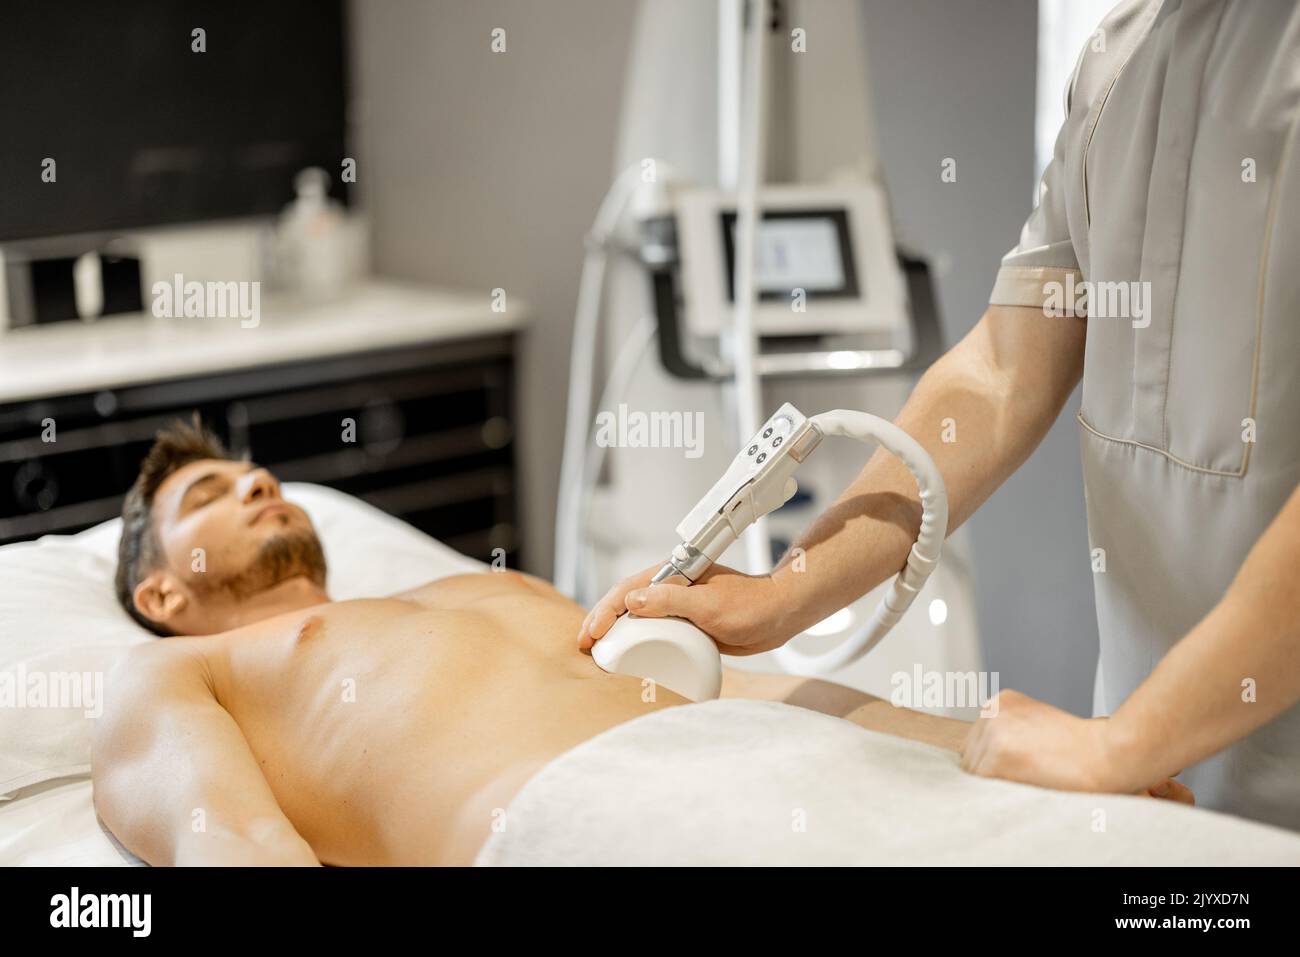 Man receiving vacuum roller massage on belly arrea at medical beauty centre. Lymphatic drainage massage procedure Stock Photo